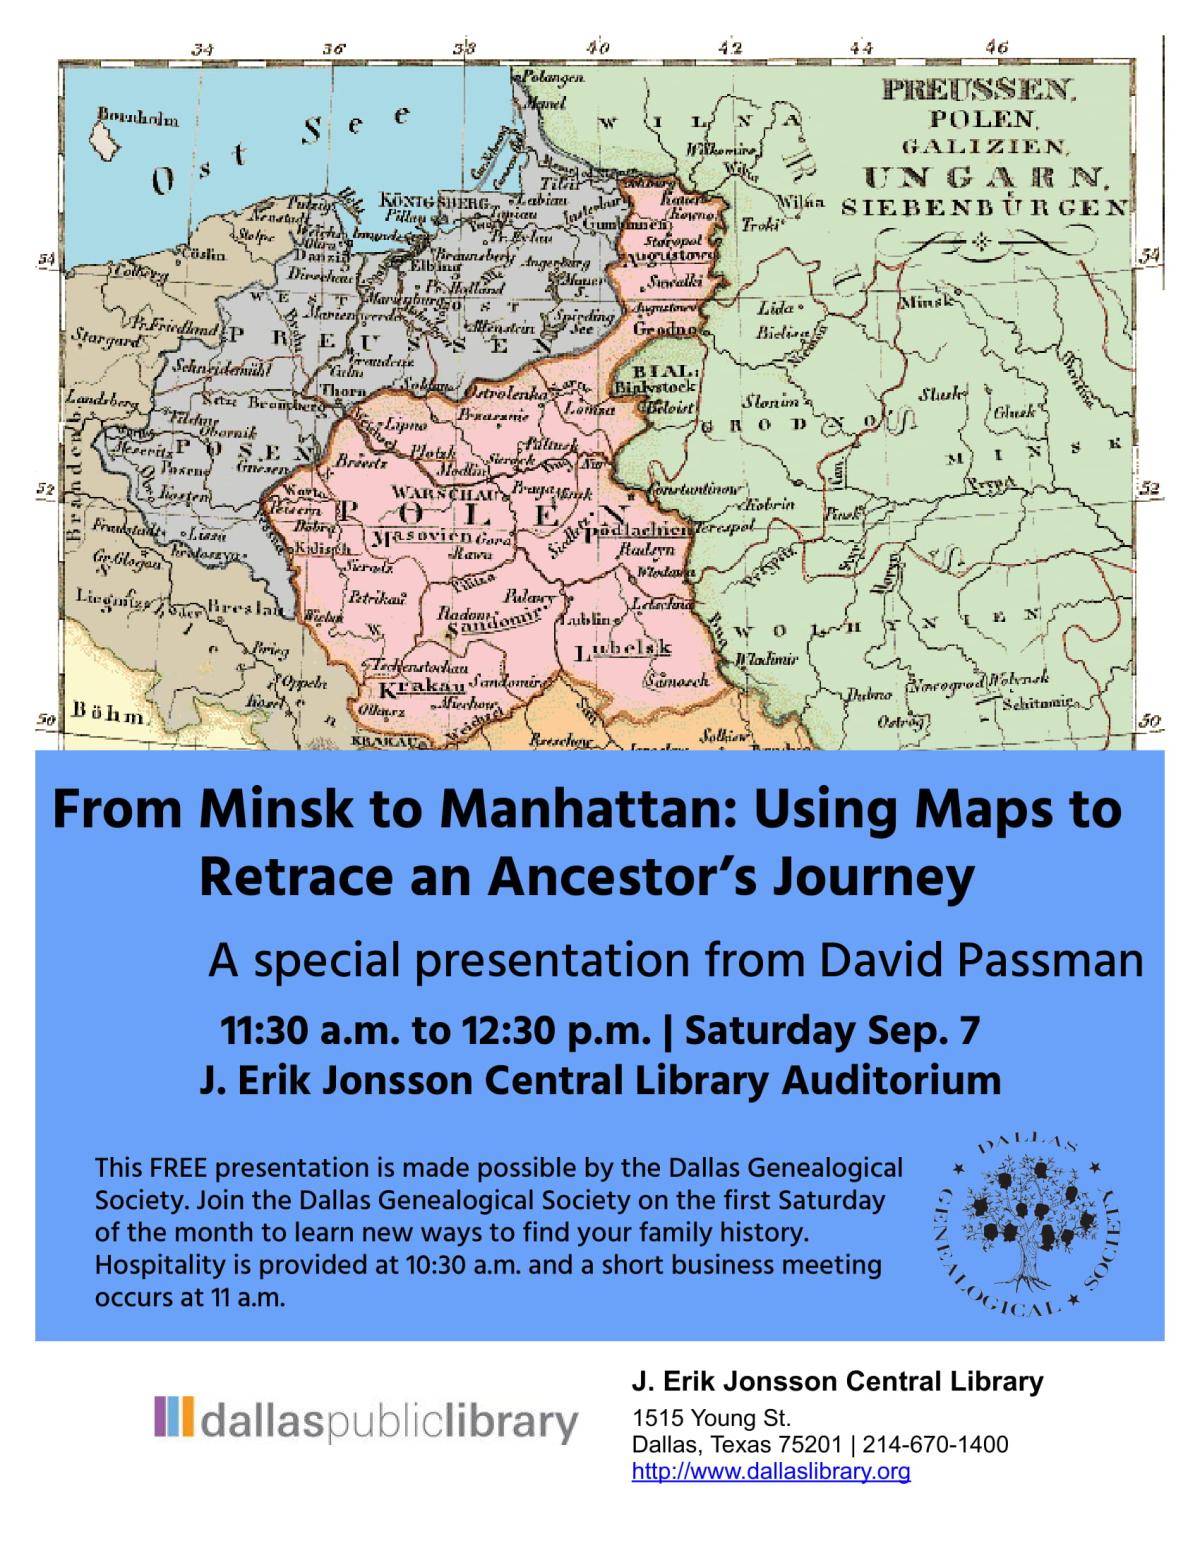 From Minsk to Manhattan: Using Maps to Retrace an Ancestor’s Journey